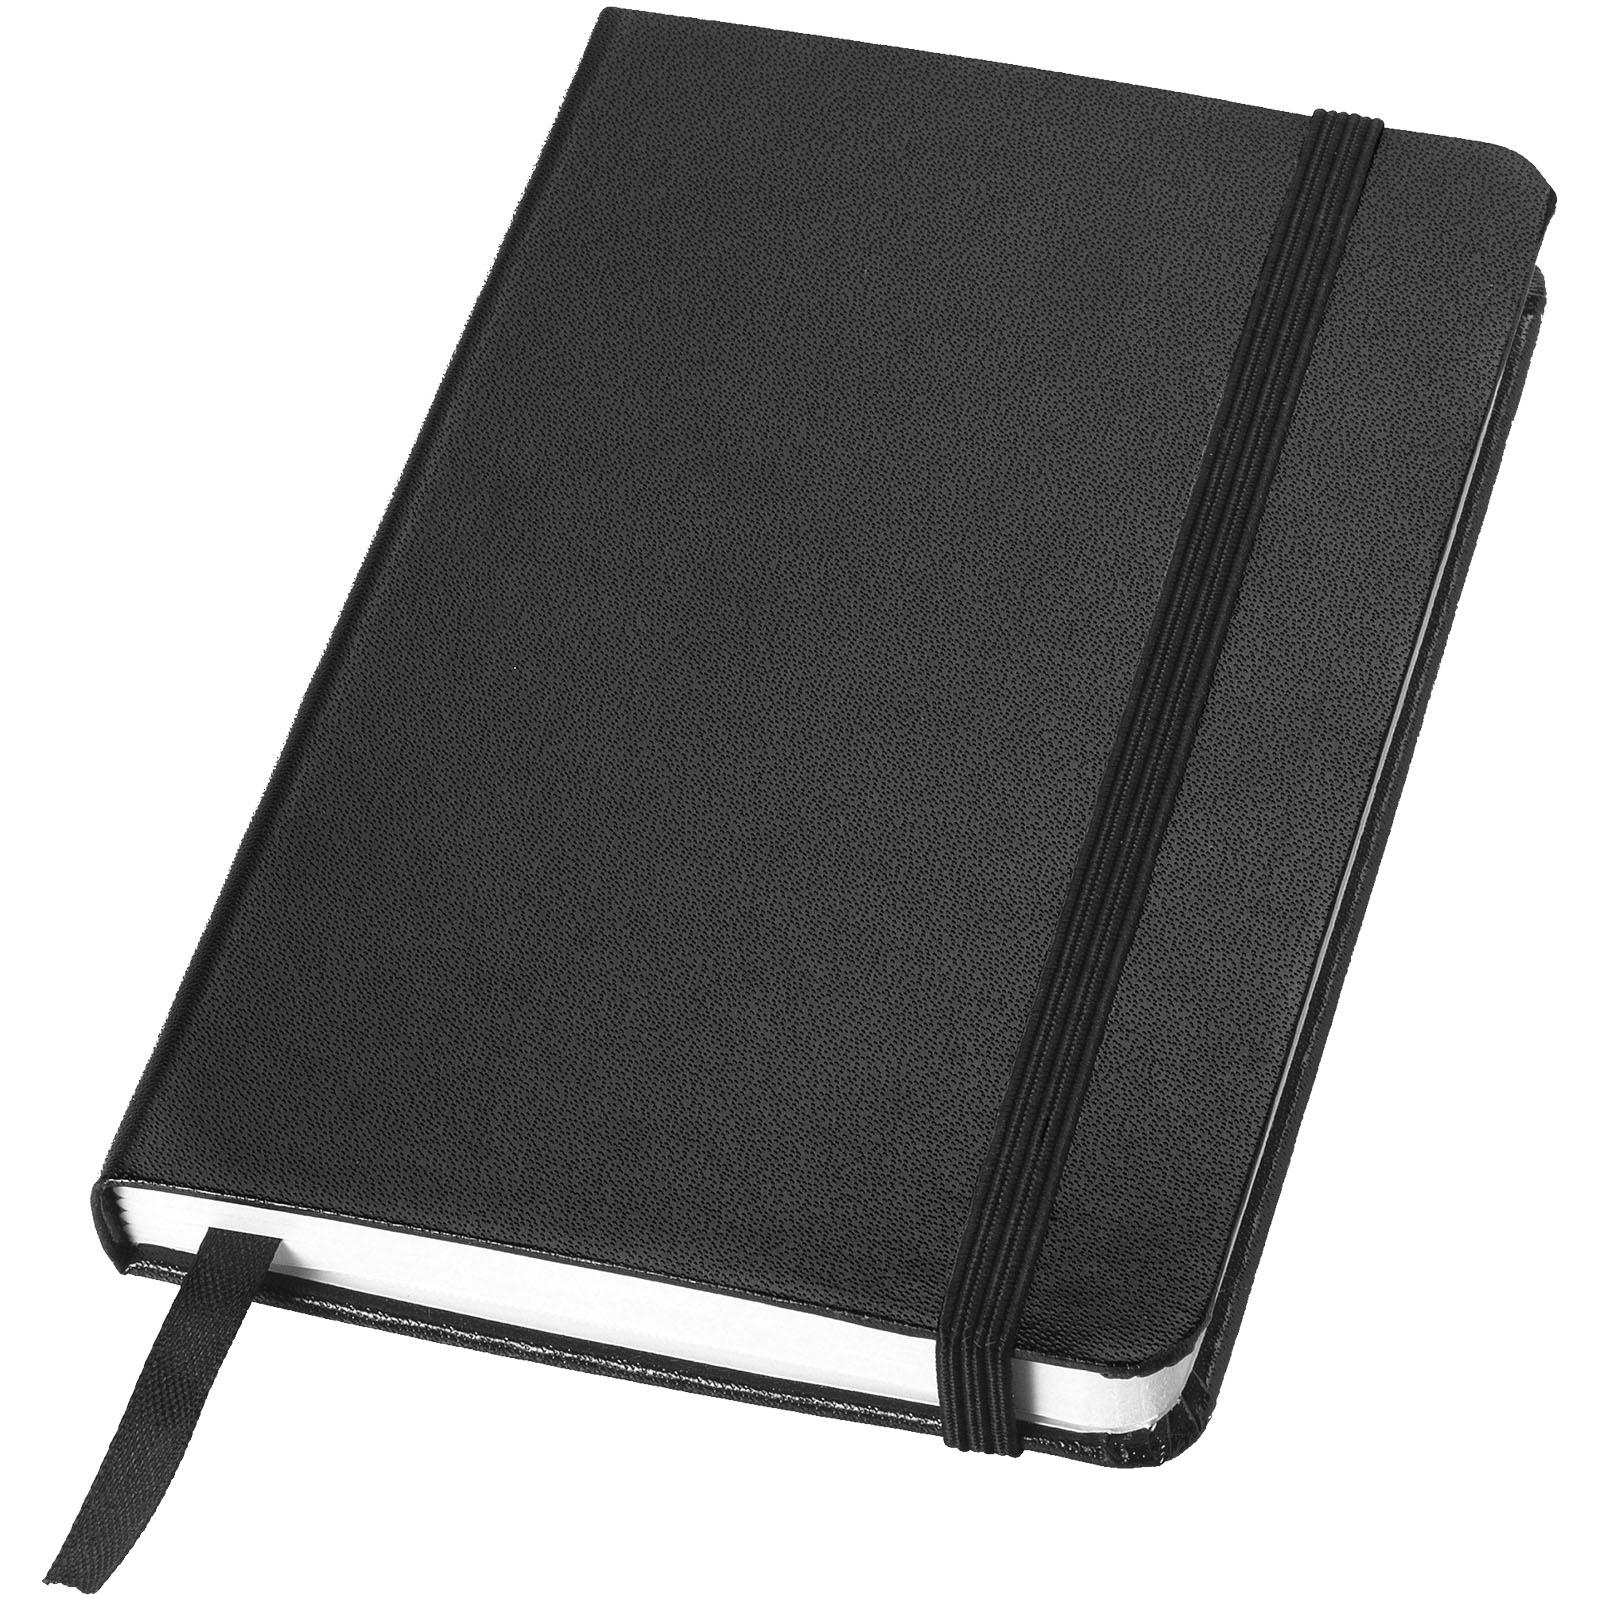 Advertising Hard cover notebooks - Classic A6 hard cover pocket notebook